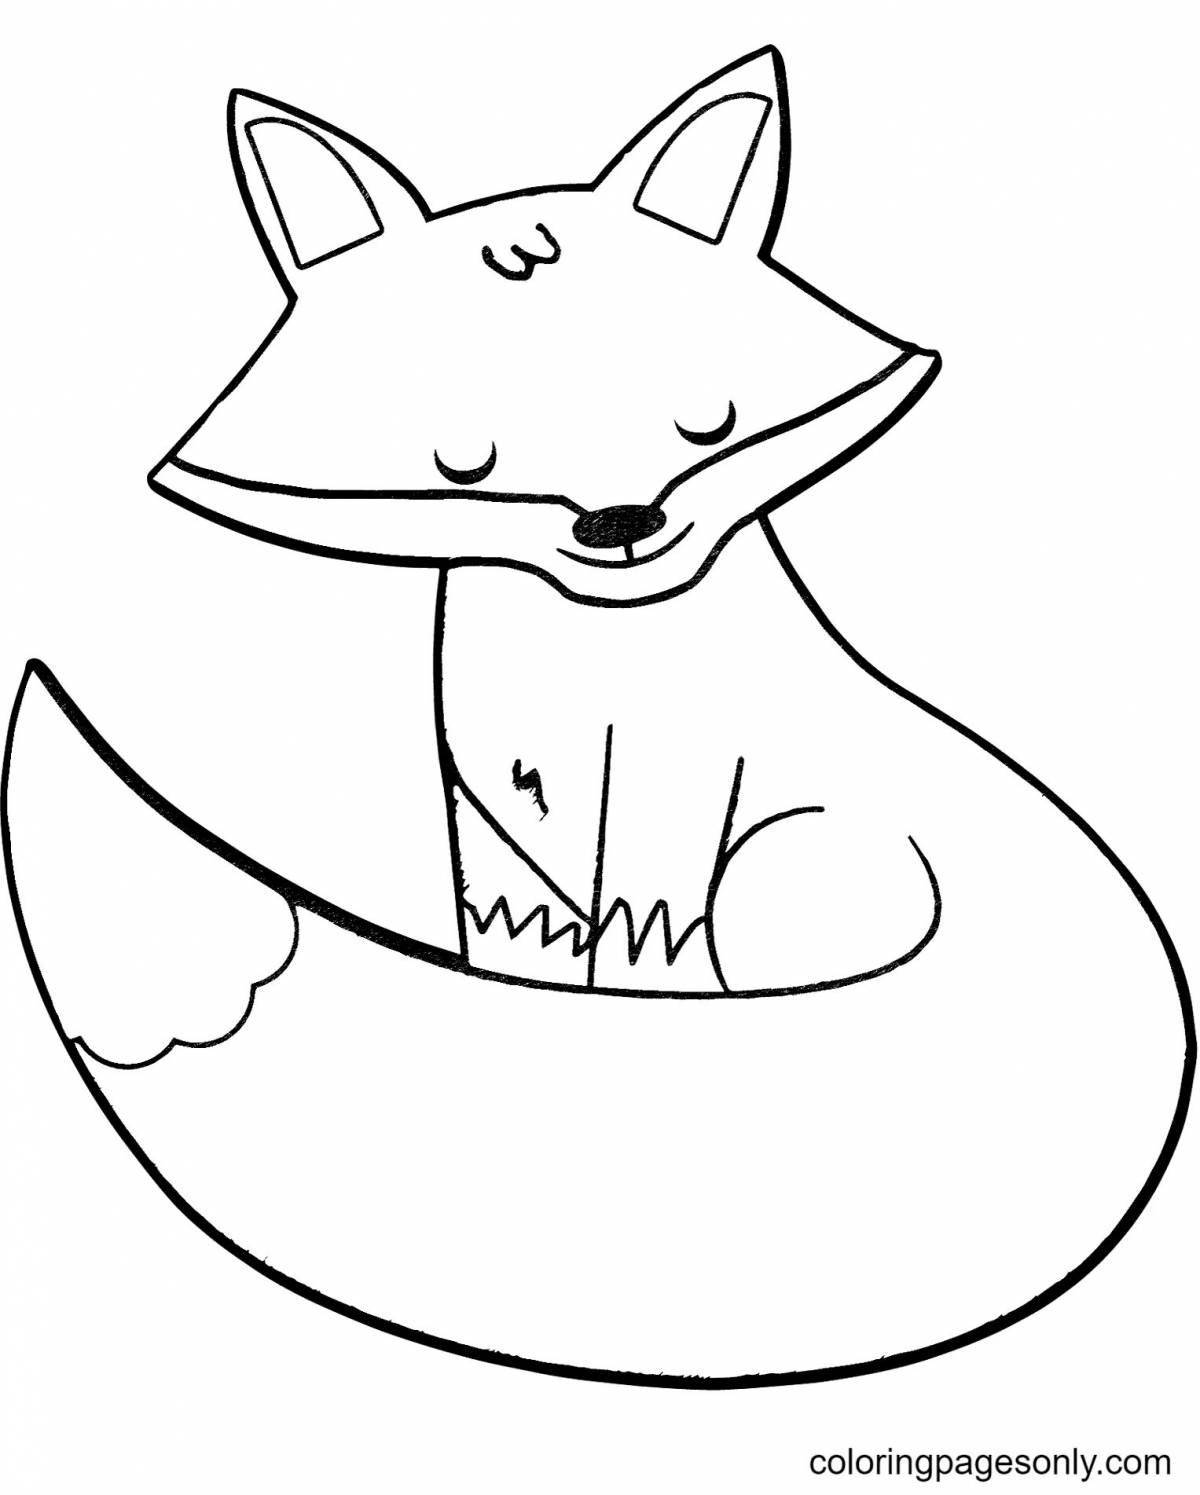 Live coloring fox for kids